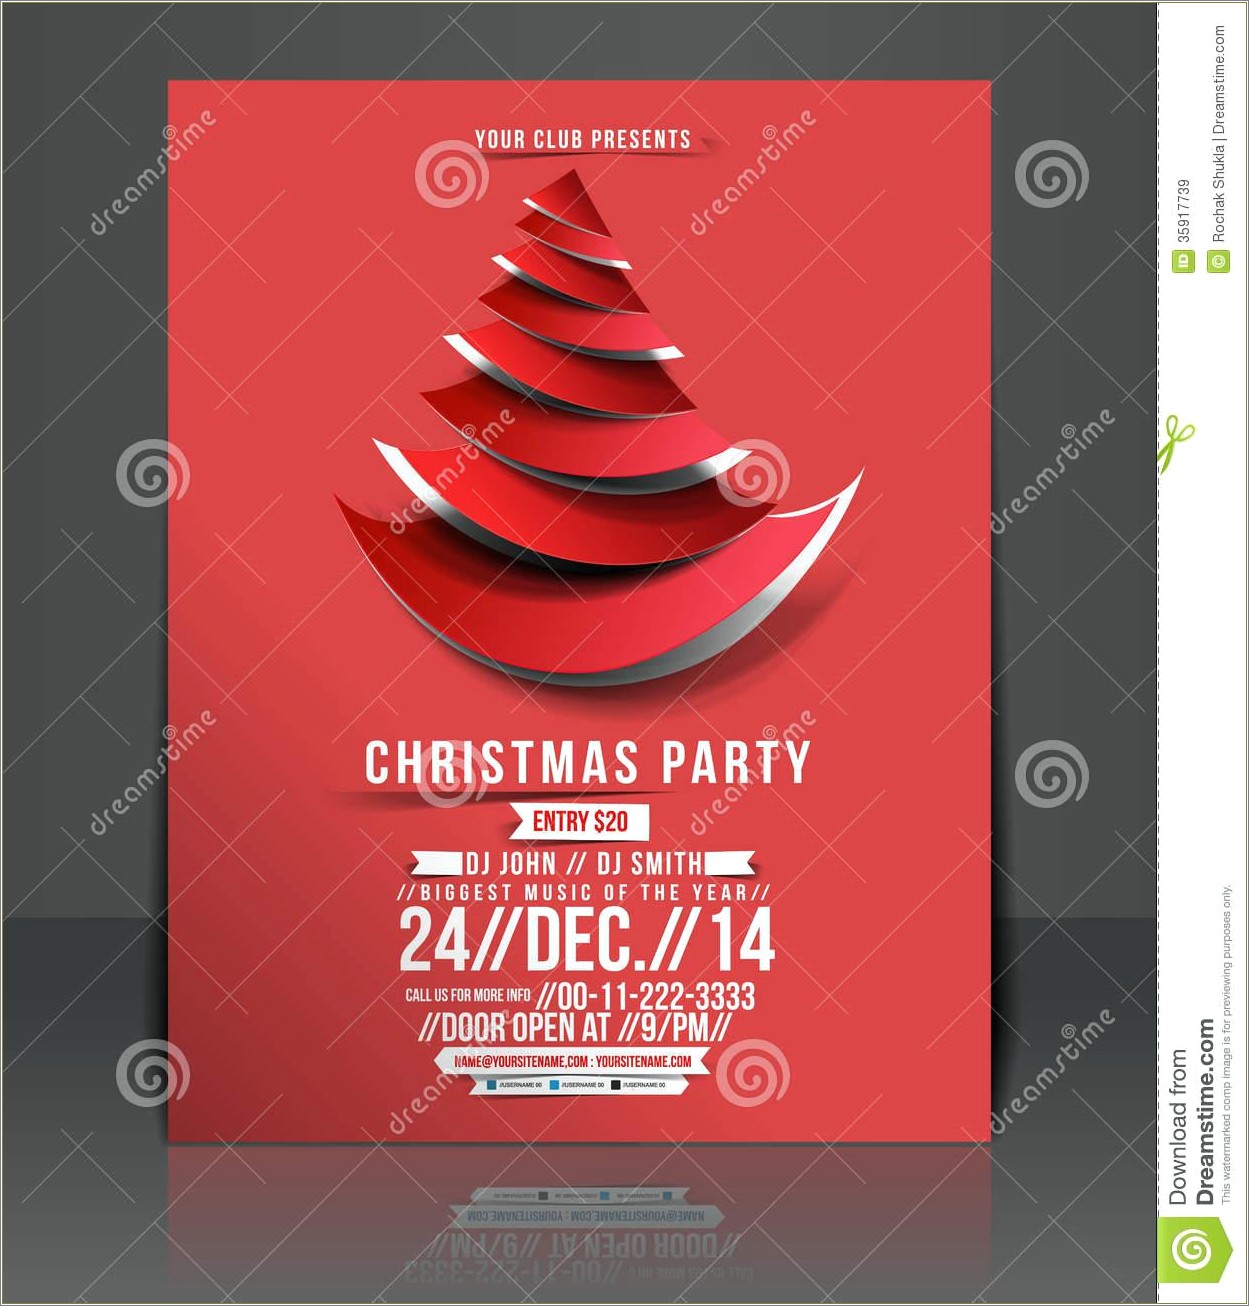 Free Holiday Party Flyer Templates For Word